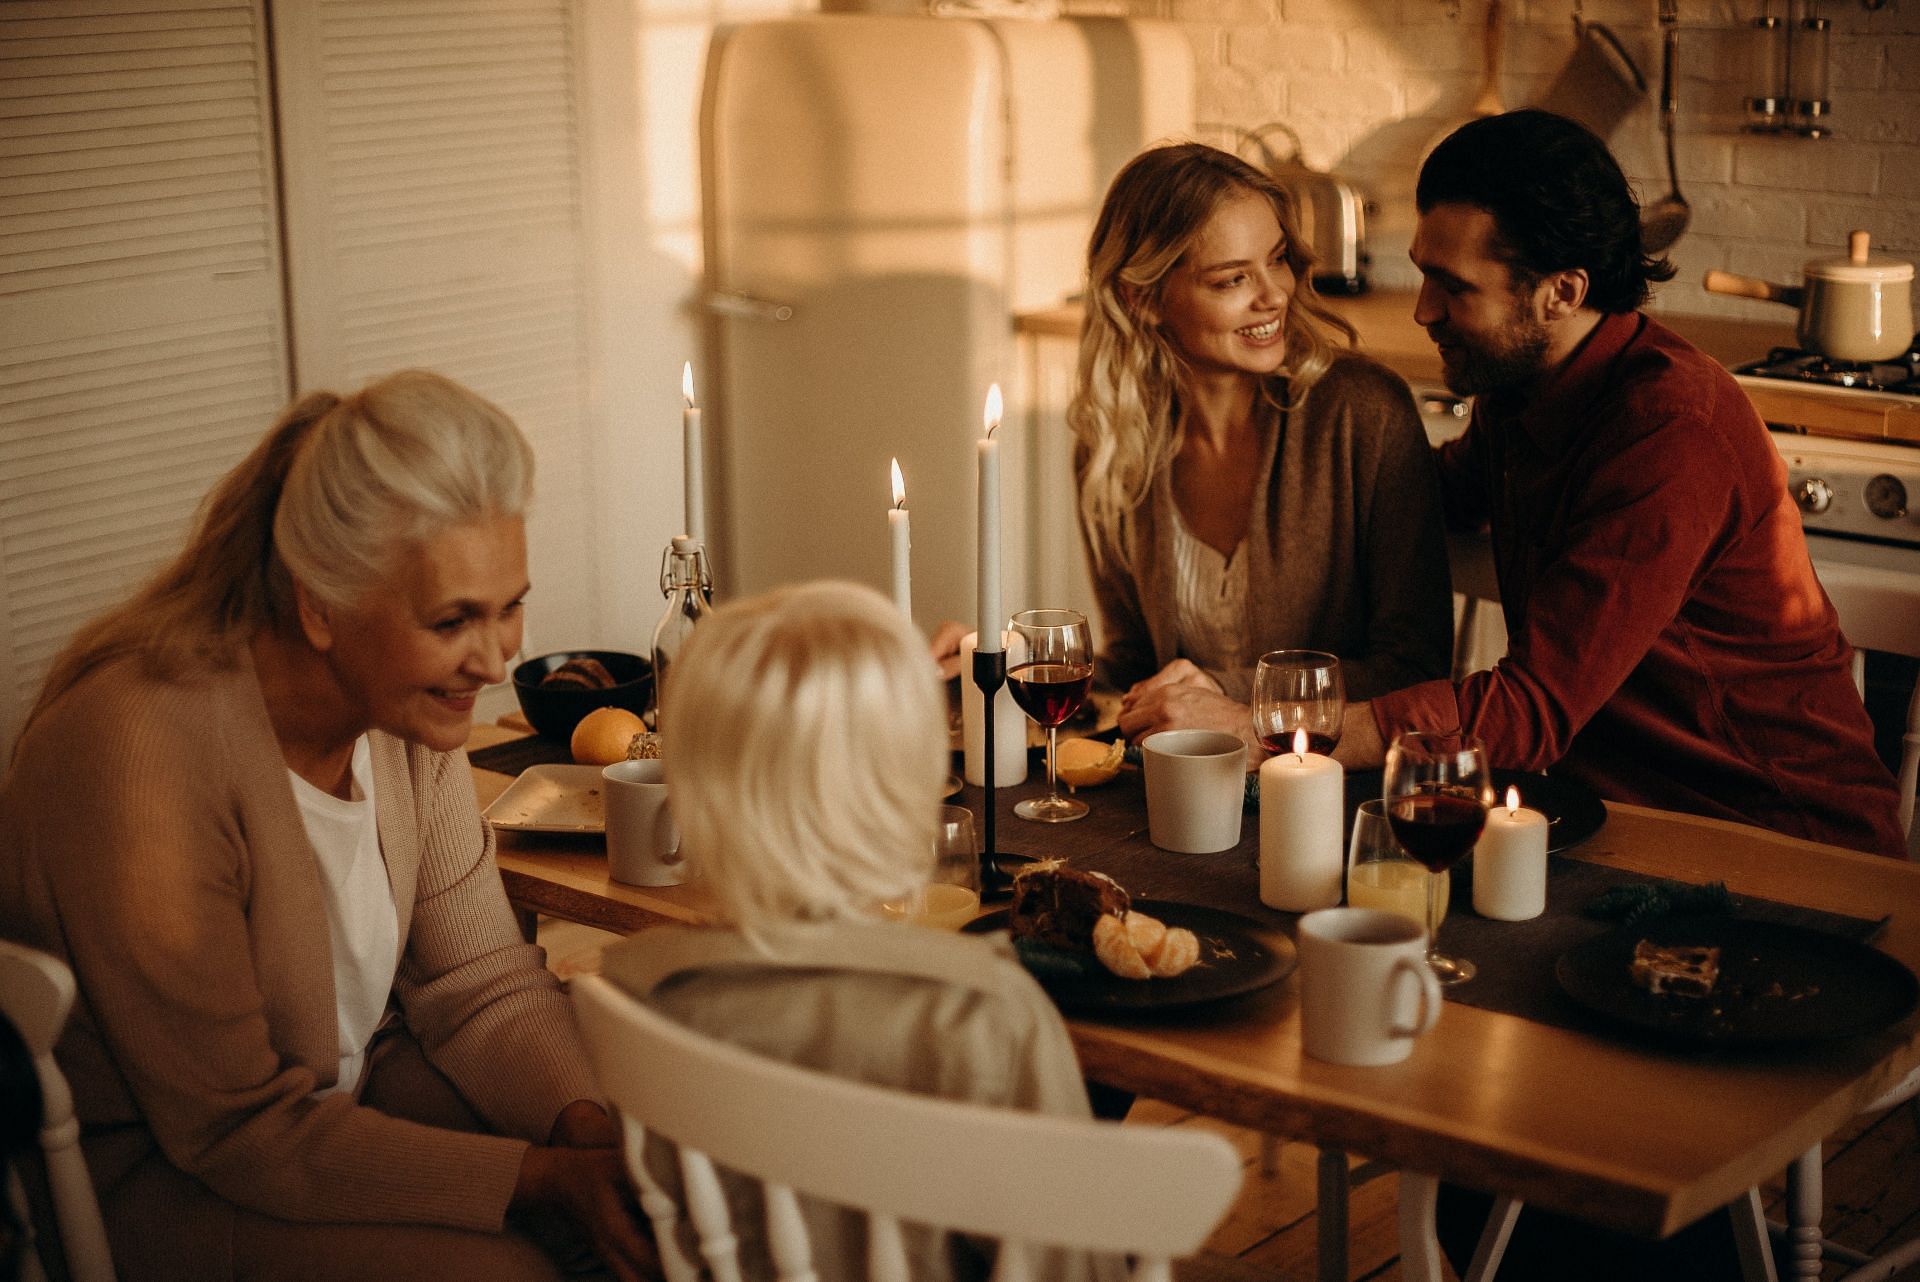 Thanksgiving is indeed a time of togetherness and love. These gestures will make your day. (Image via Pexels/ Cottonbro studio)